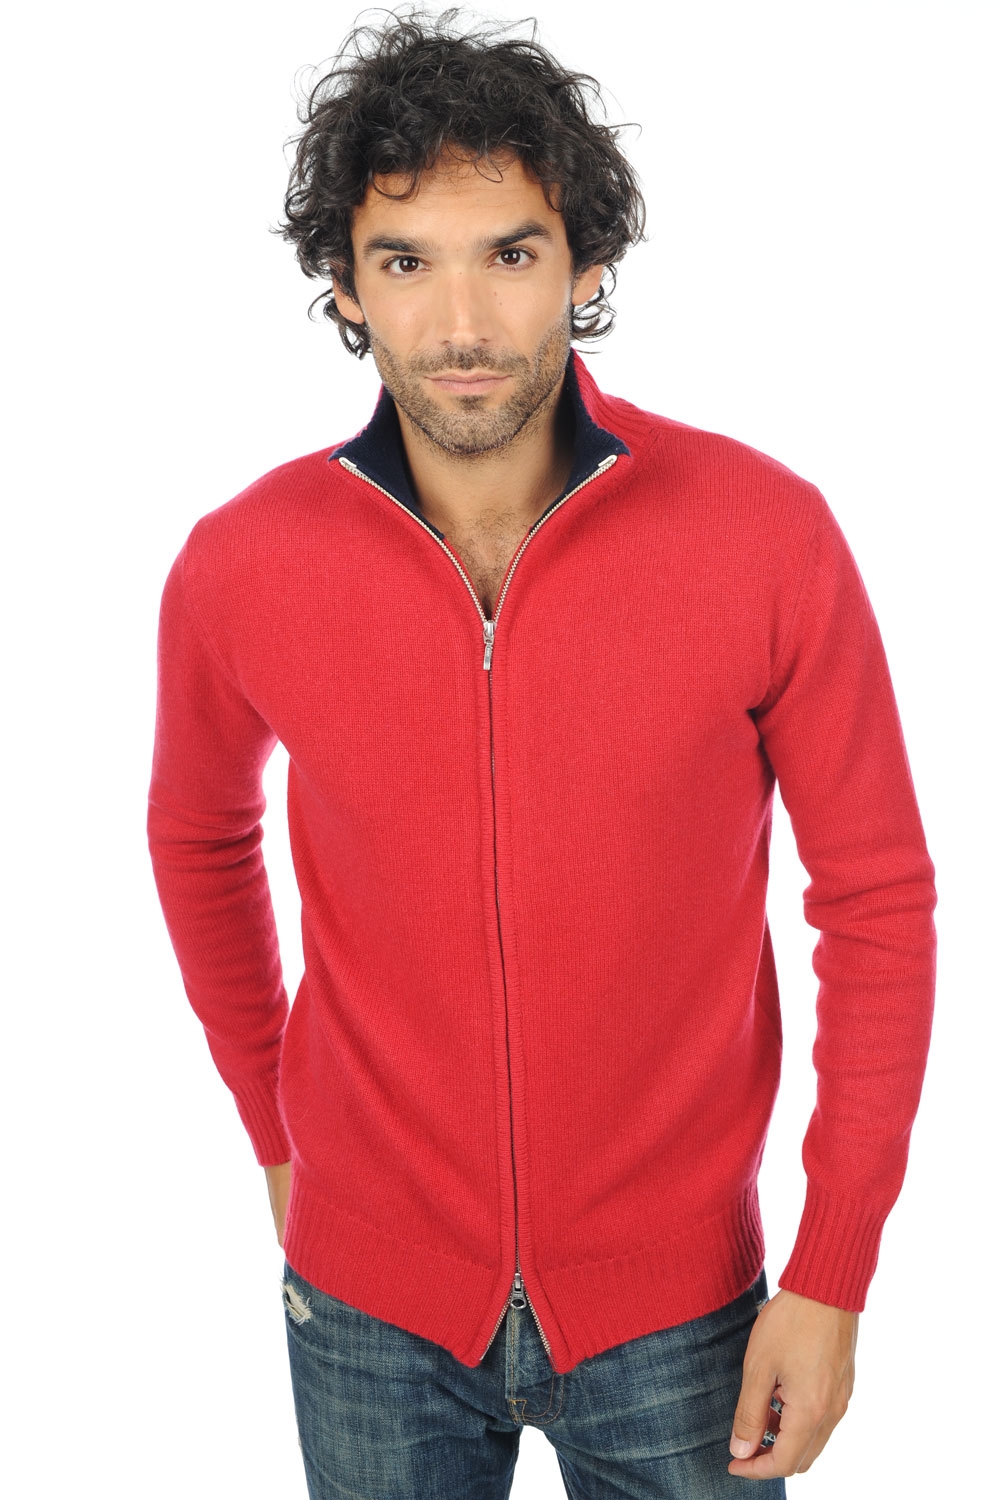 Cachemire pull homme zip capuche maxime rouge velours marine fonce s